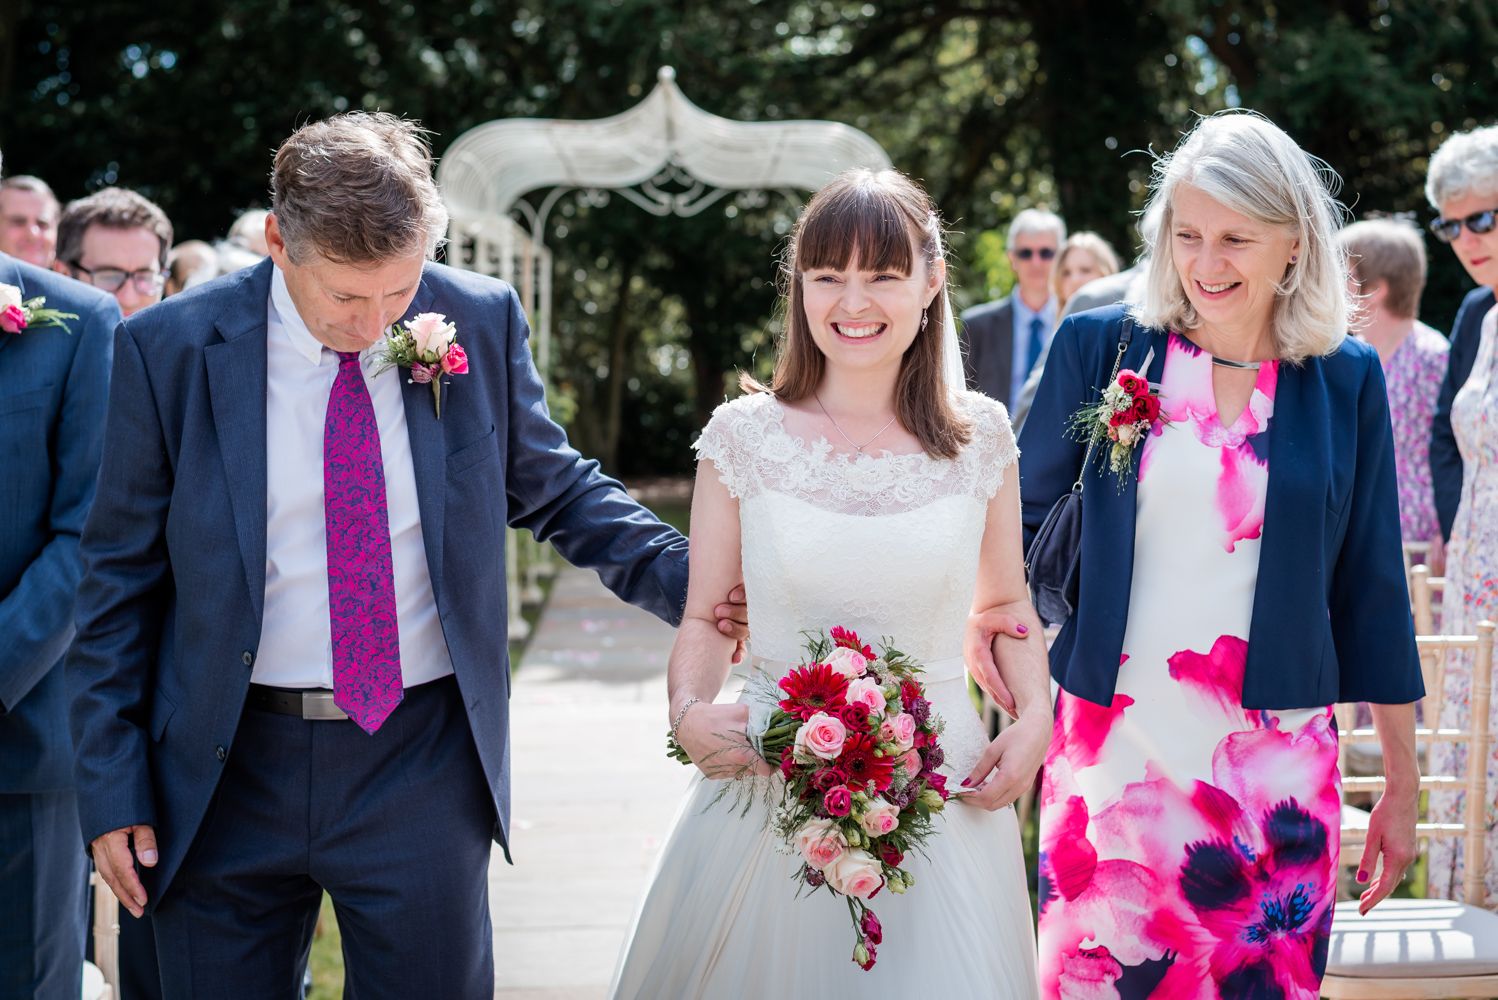 A Mother and Father walk their daughter down the Isle on her wedding day. The ladies are smiling and the father is looking down collecting his thoughts.